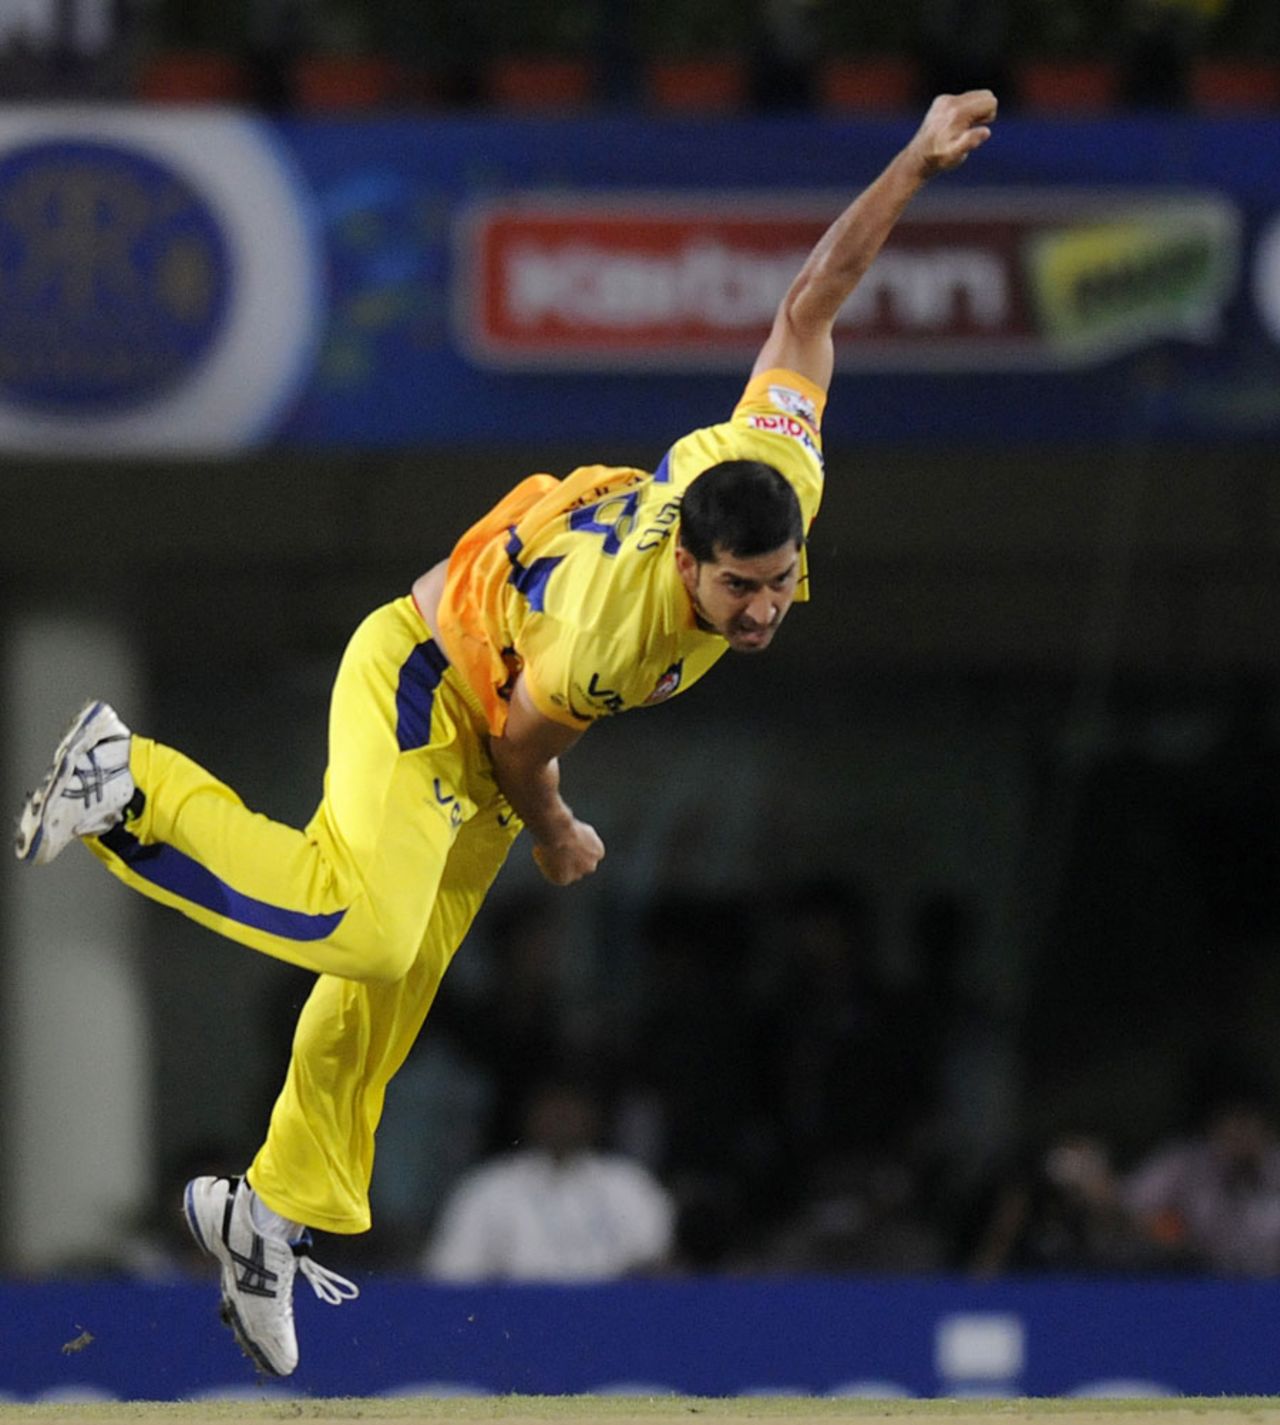 Mohit Sharma in his delivery stride, Brisbane Heat v Chennai Super Kings, Group B, Champions League 2013, Ranchi, September 28, 2013